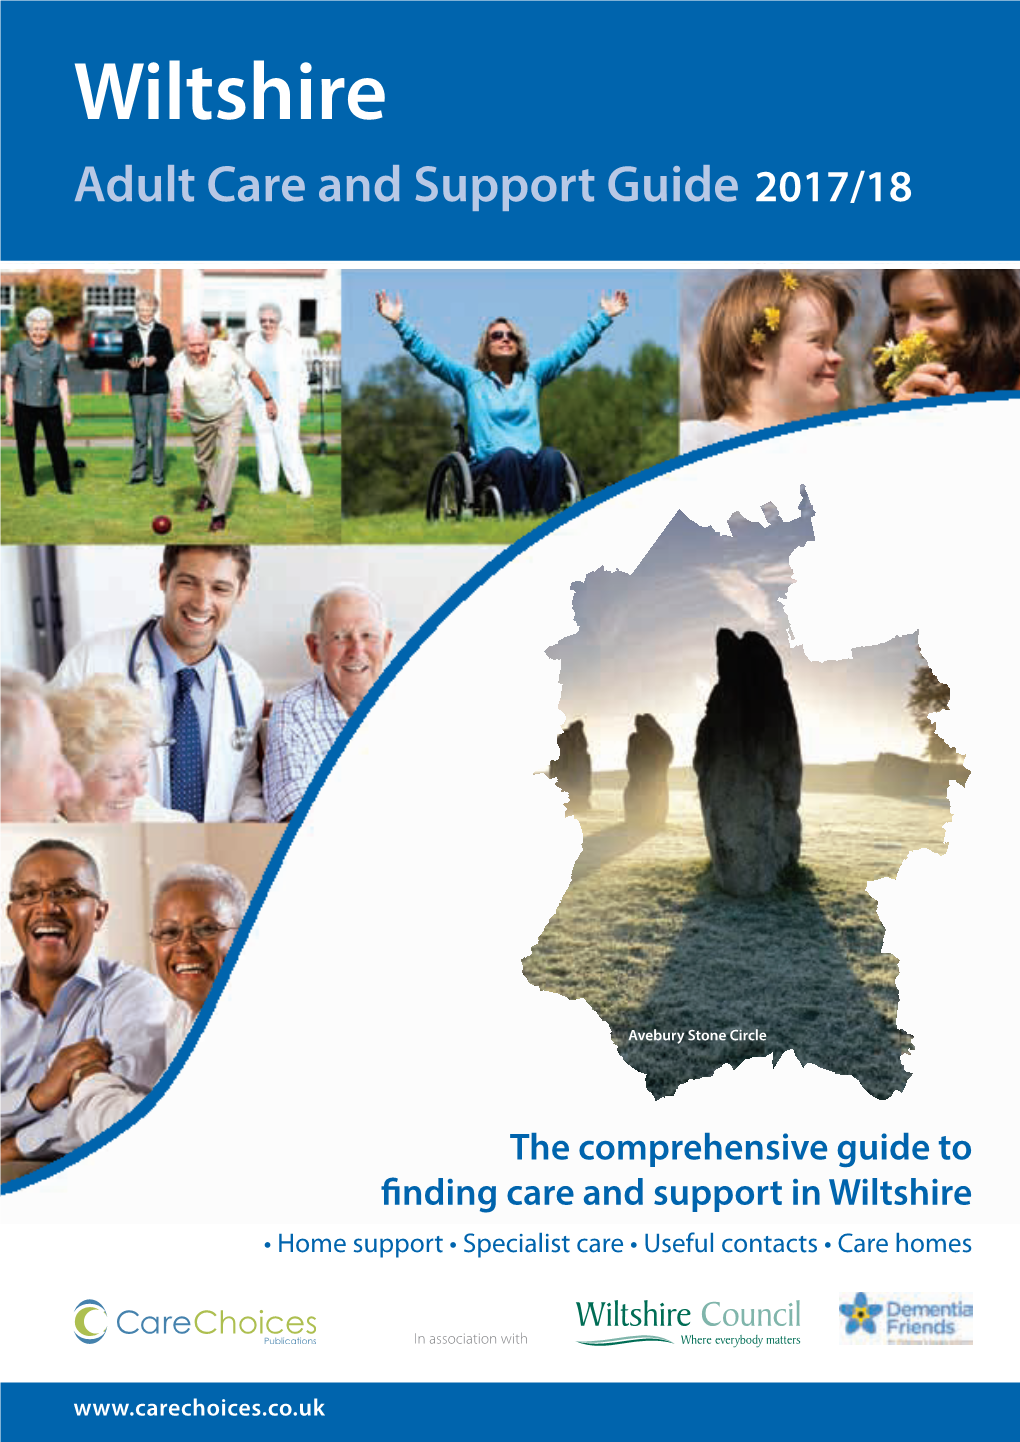 Wiltshire Adult Care and Support Guide 2017/18